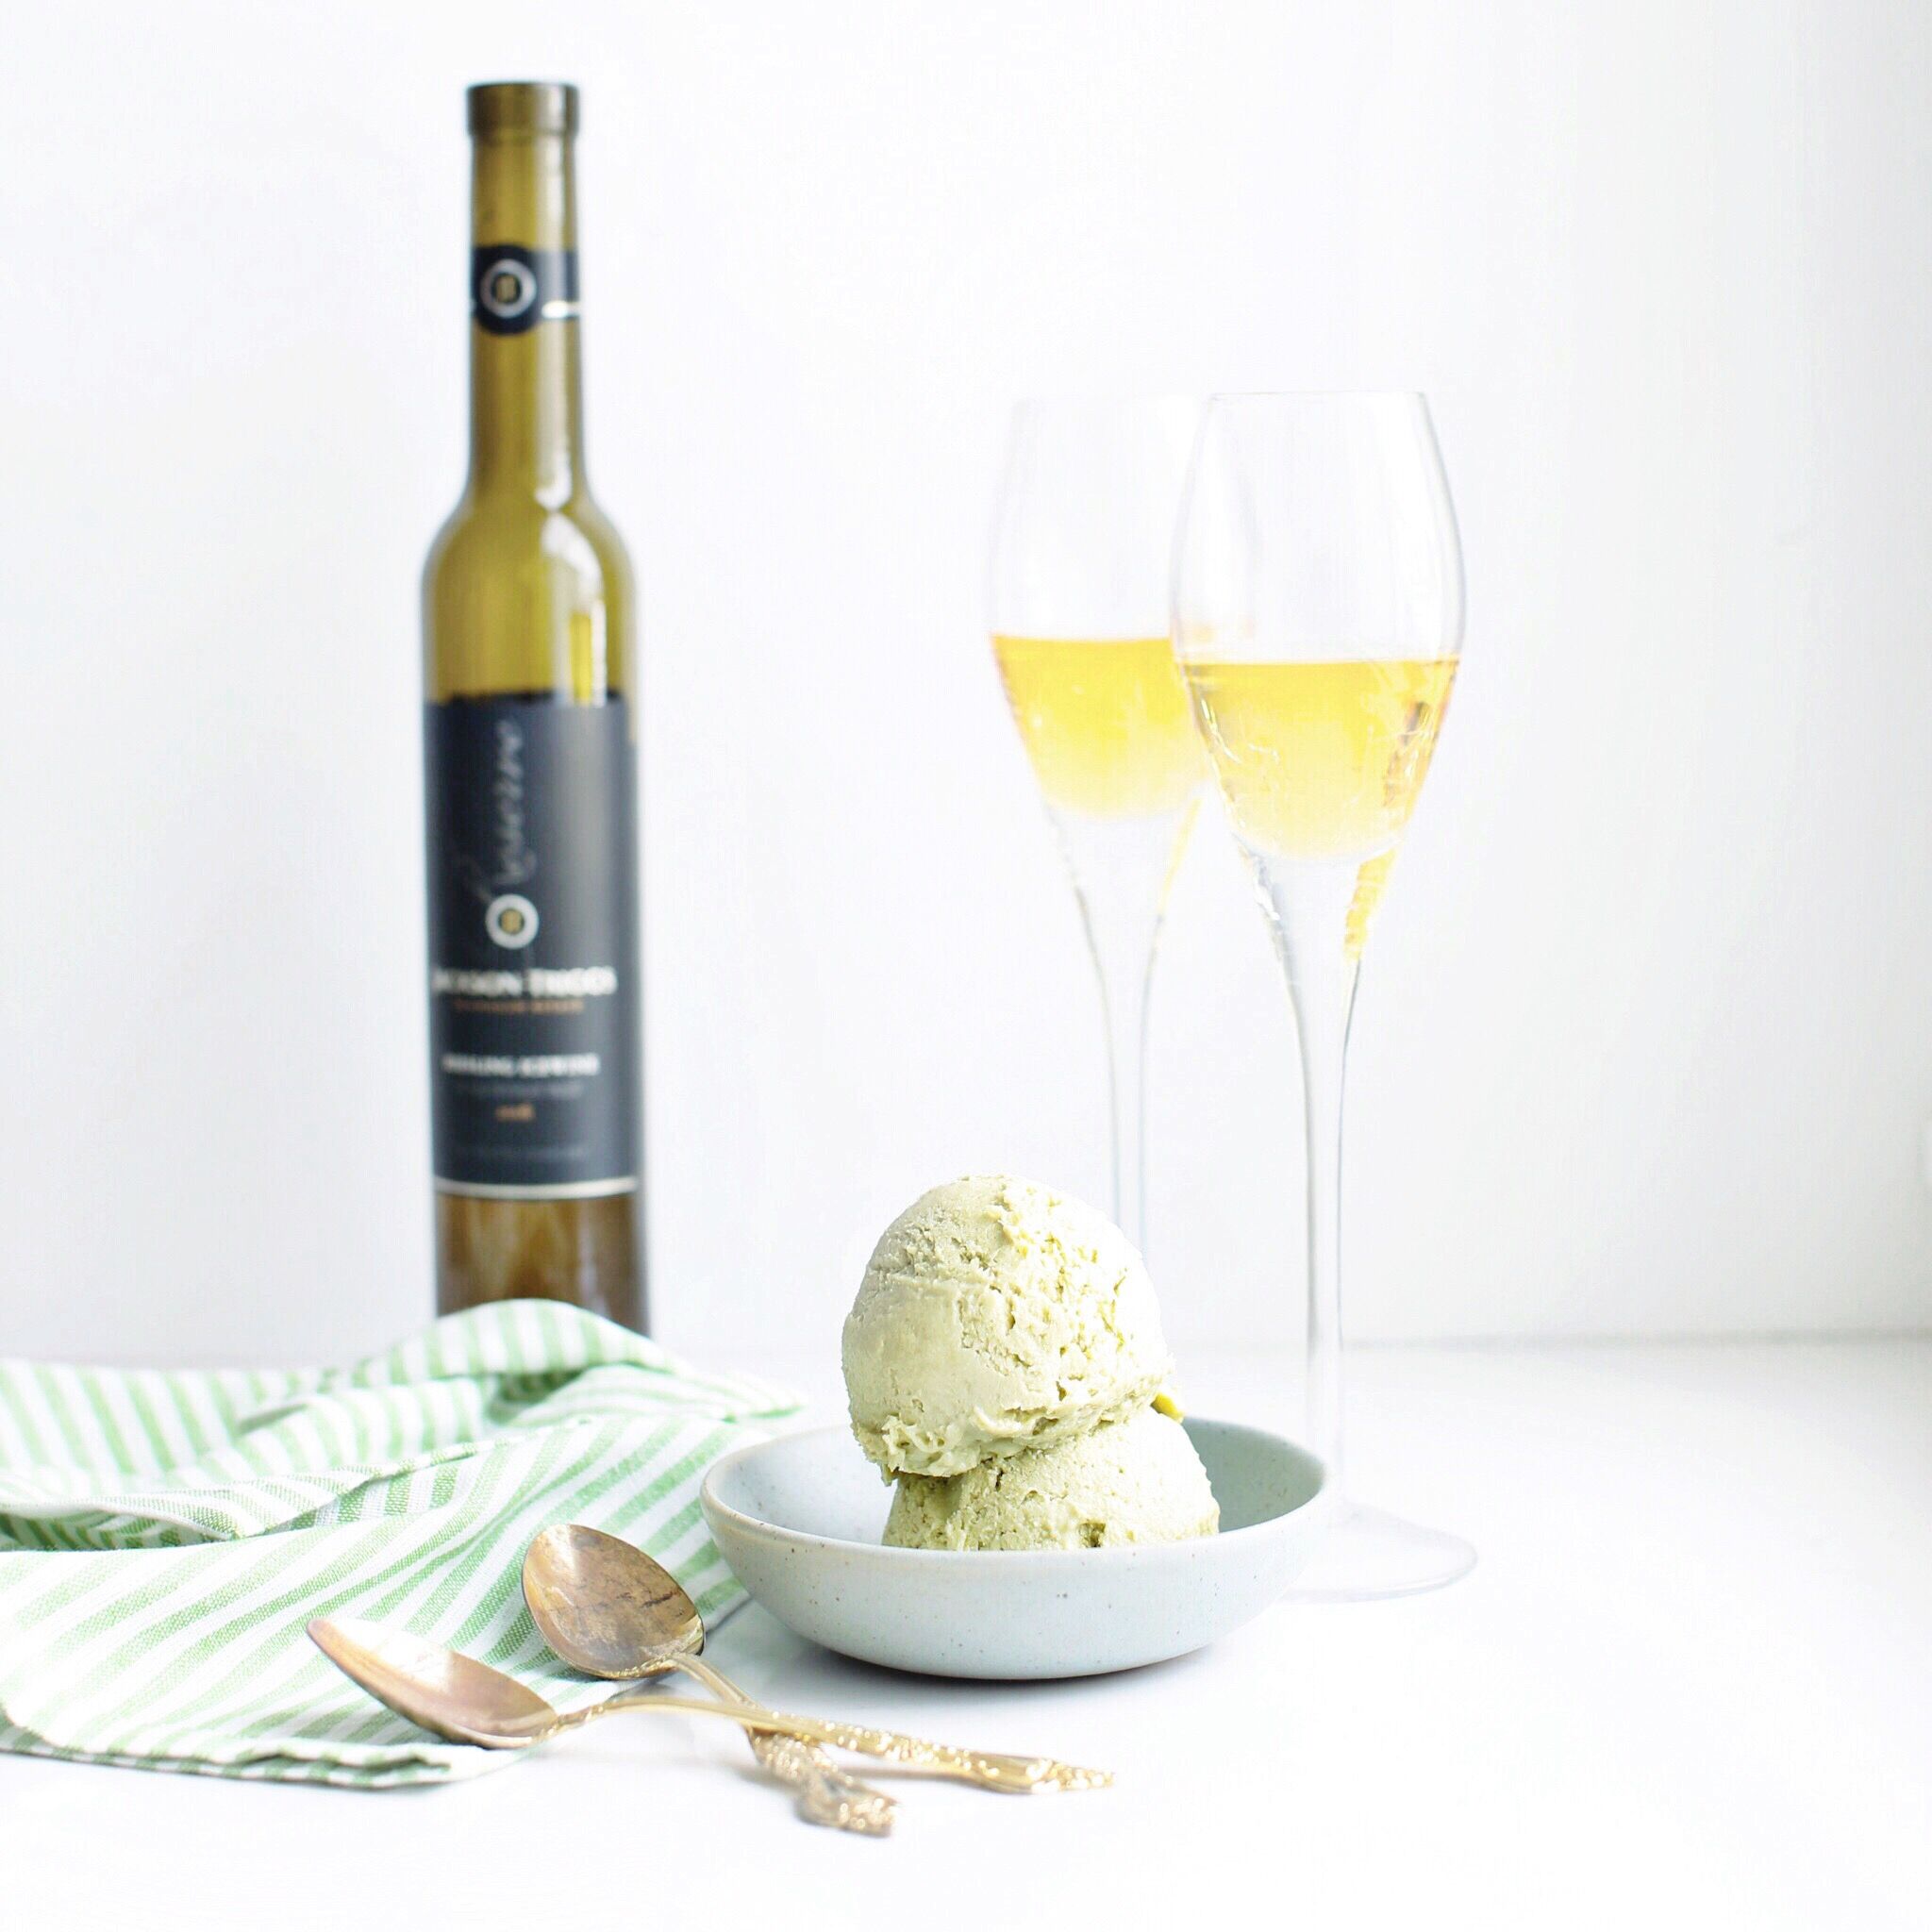 Avocado Lime Ice Cream paired with BC Ice wine